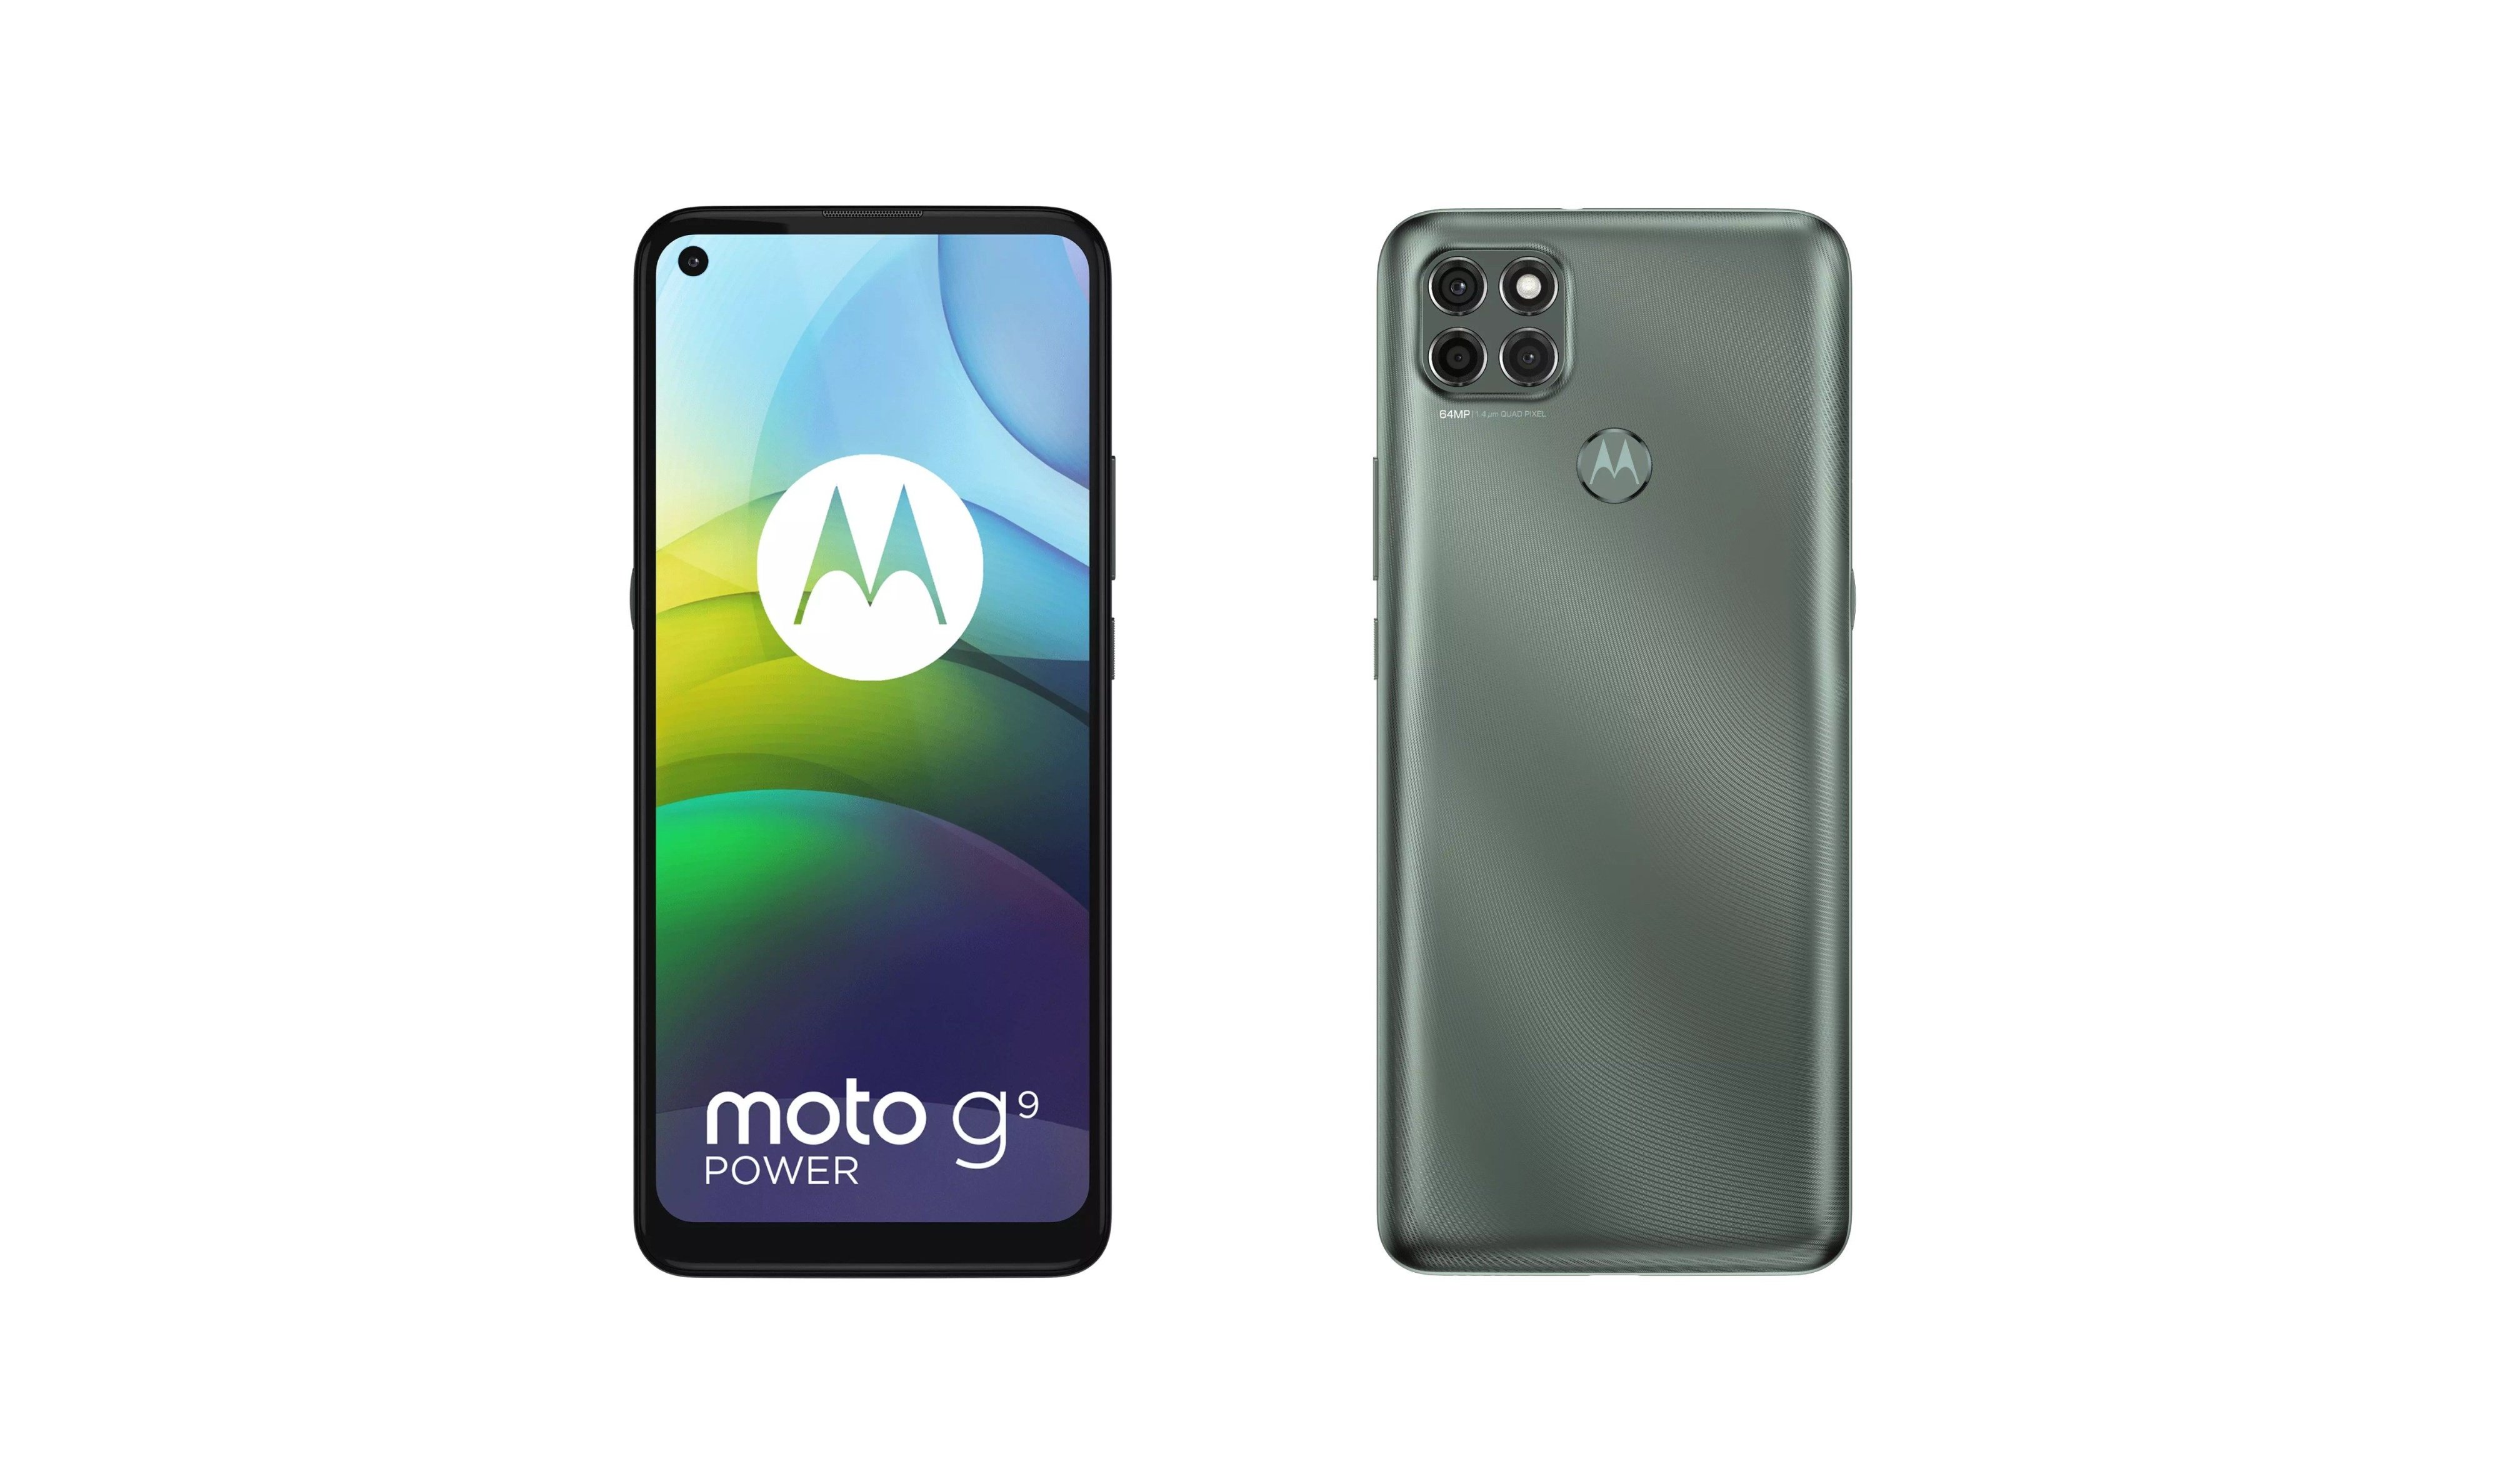 Moto G9 Power is set to launch in India on December 8